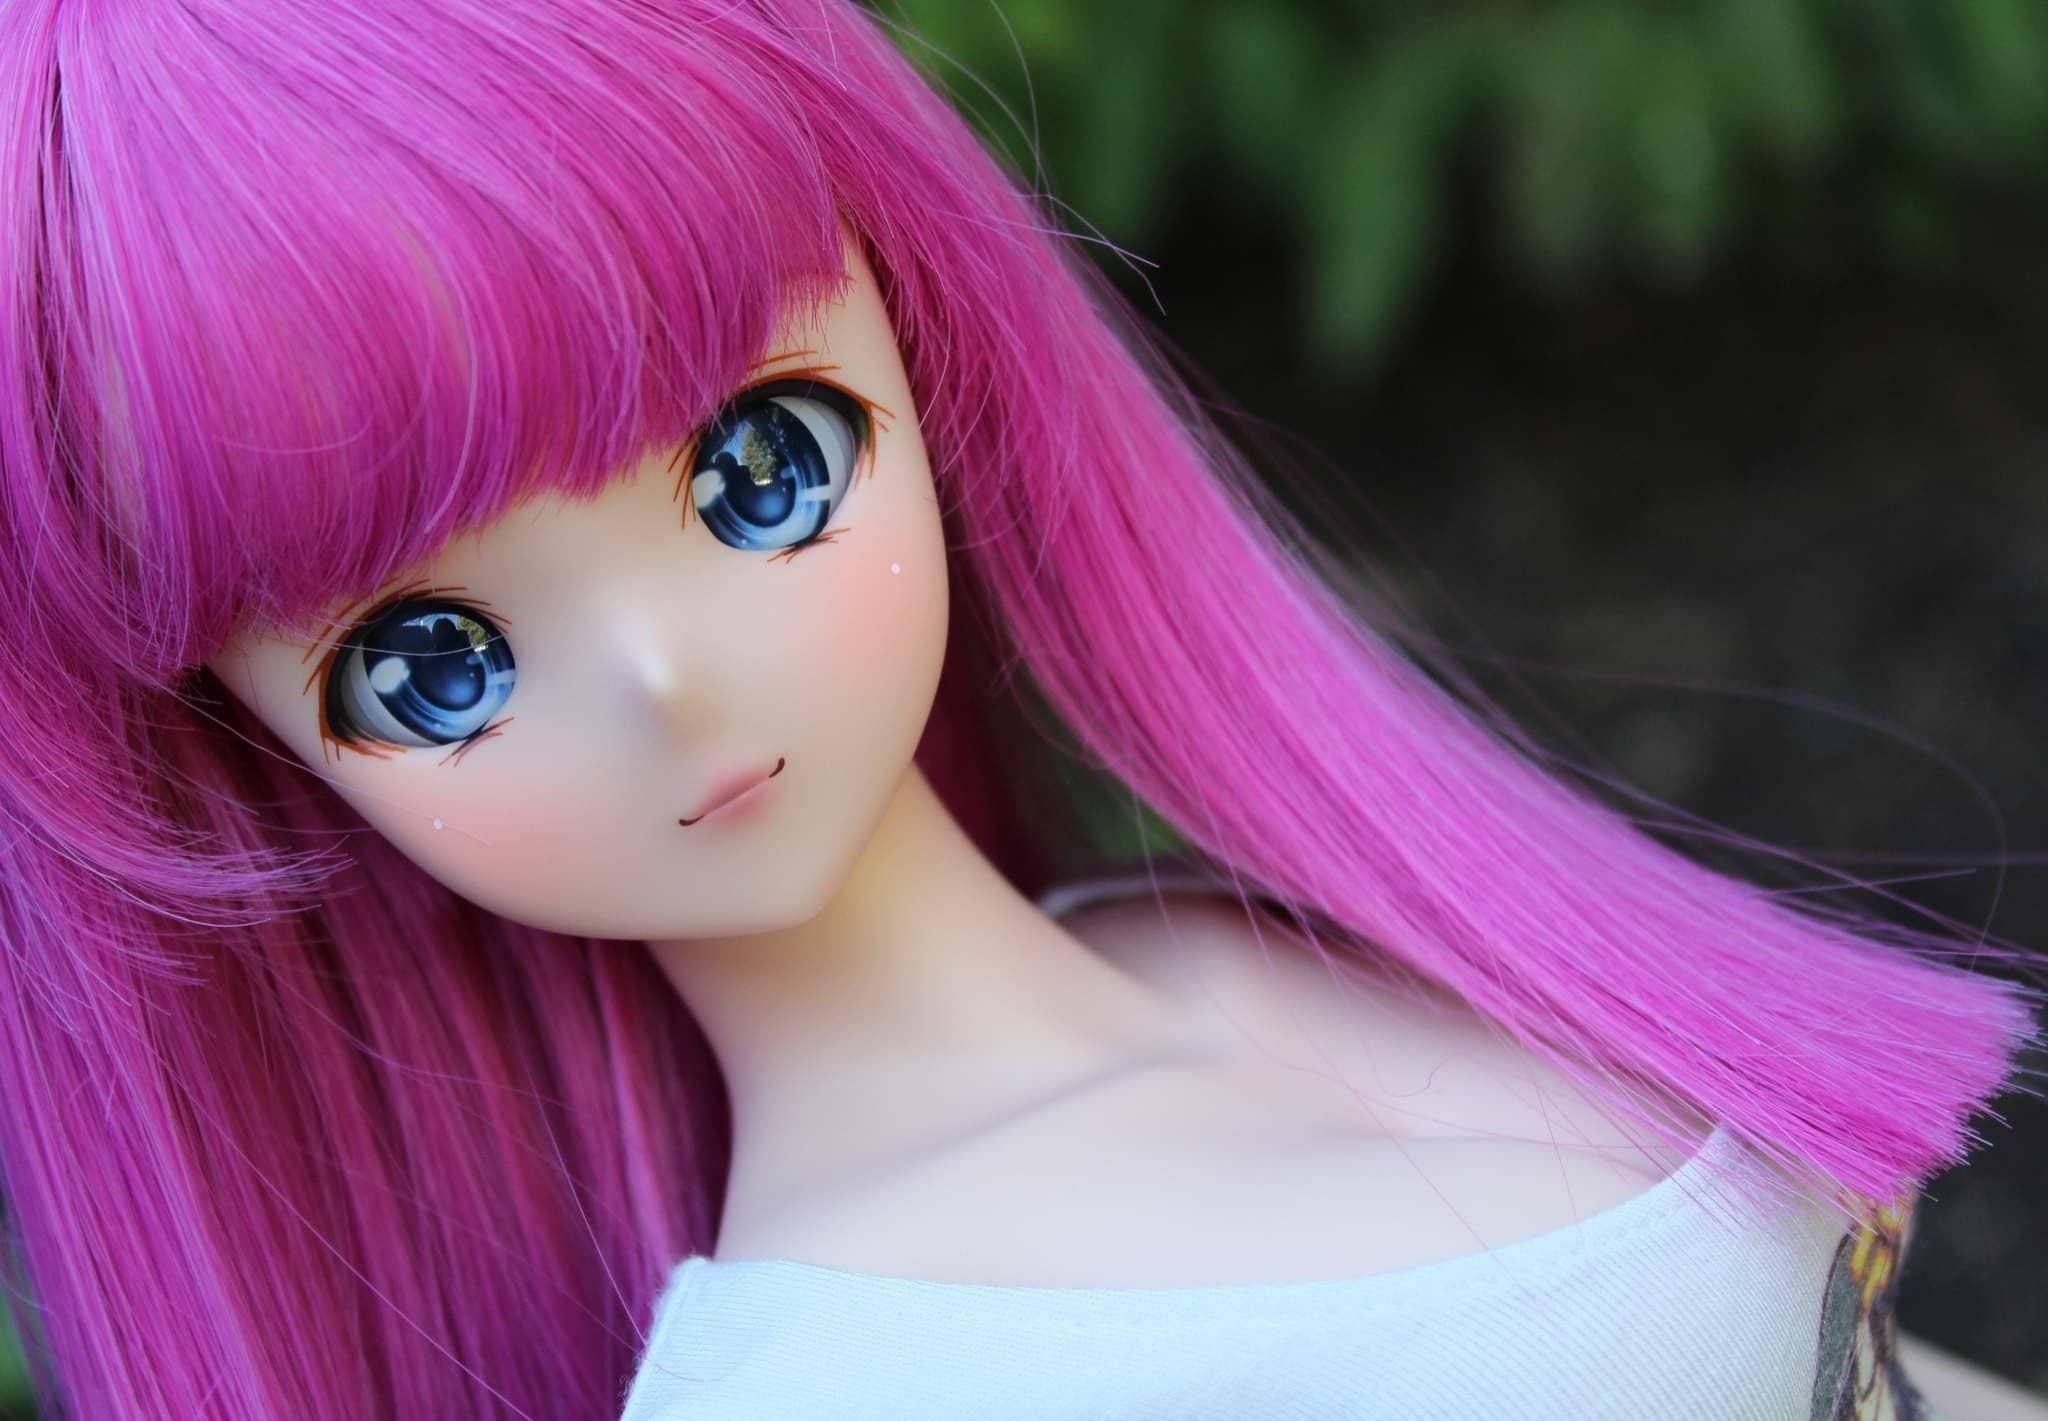 Custom doll WIG for Smart Dolls- Heat Safe - Tangle Resistant- 8.5" head size of Bjd, SD, Dollfie Dream dolls Hot Pink anime Limited